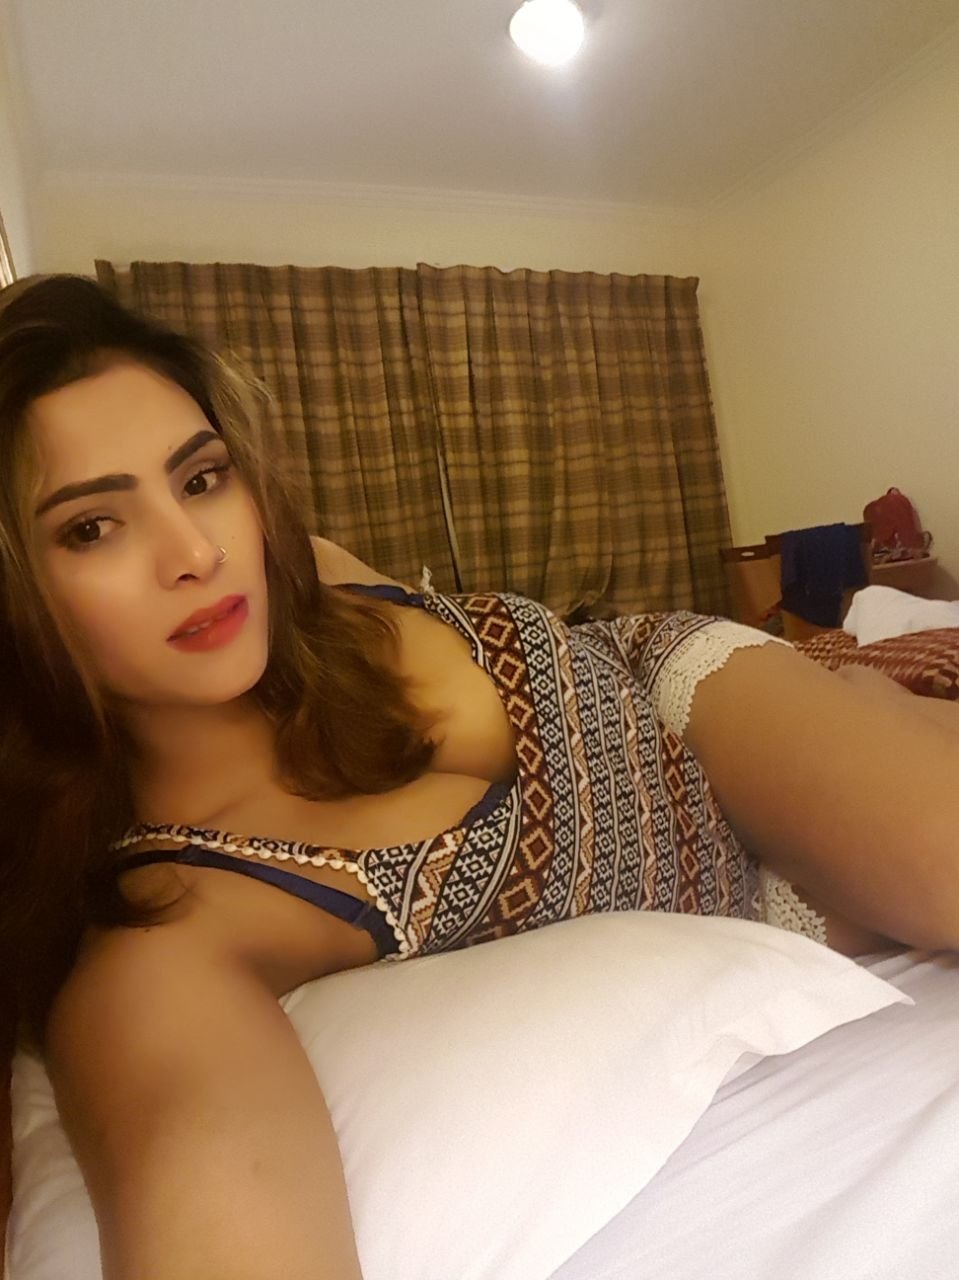 Nilam independence genuine call girl all positions sex provide